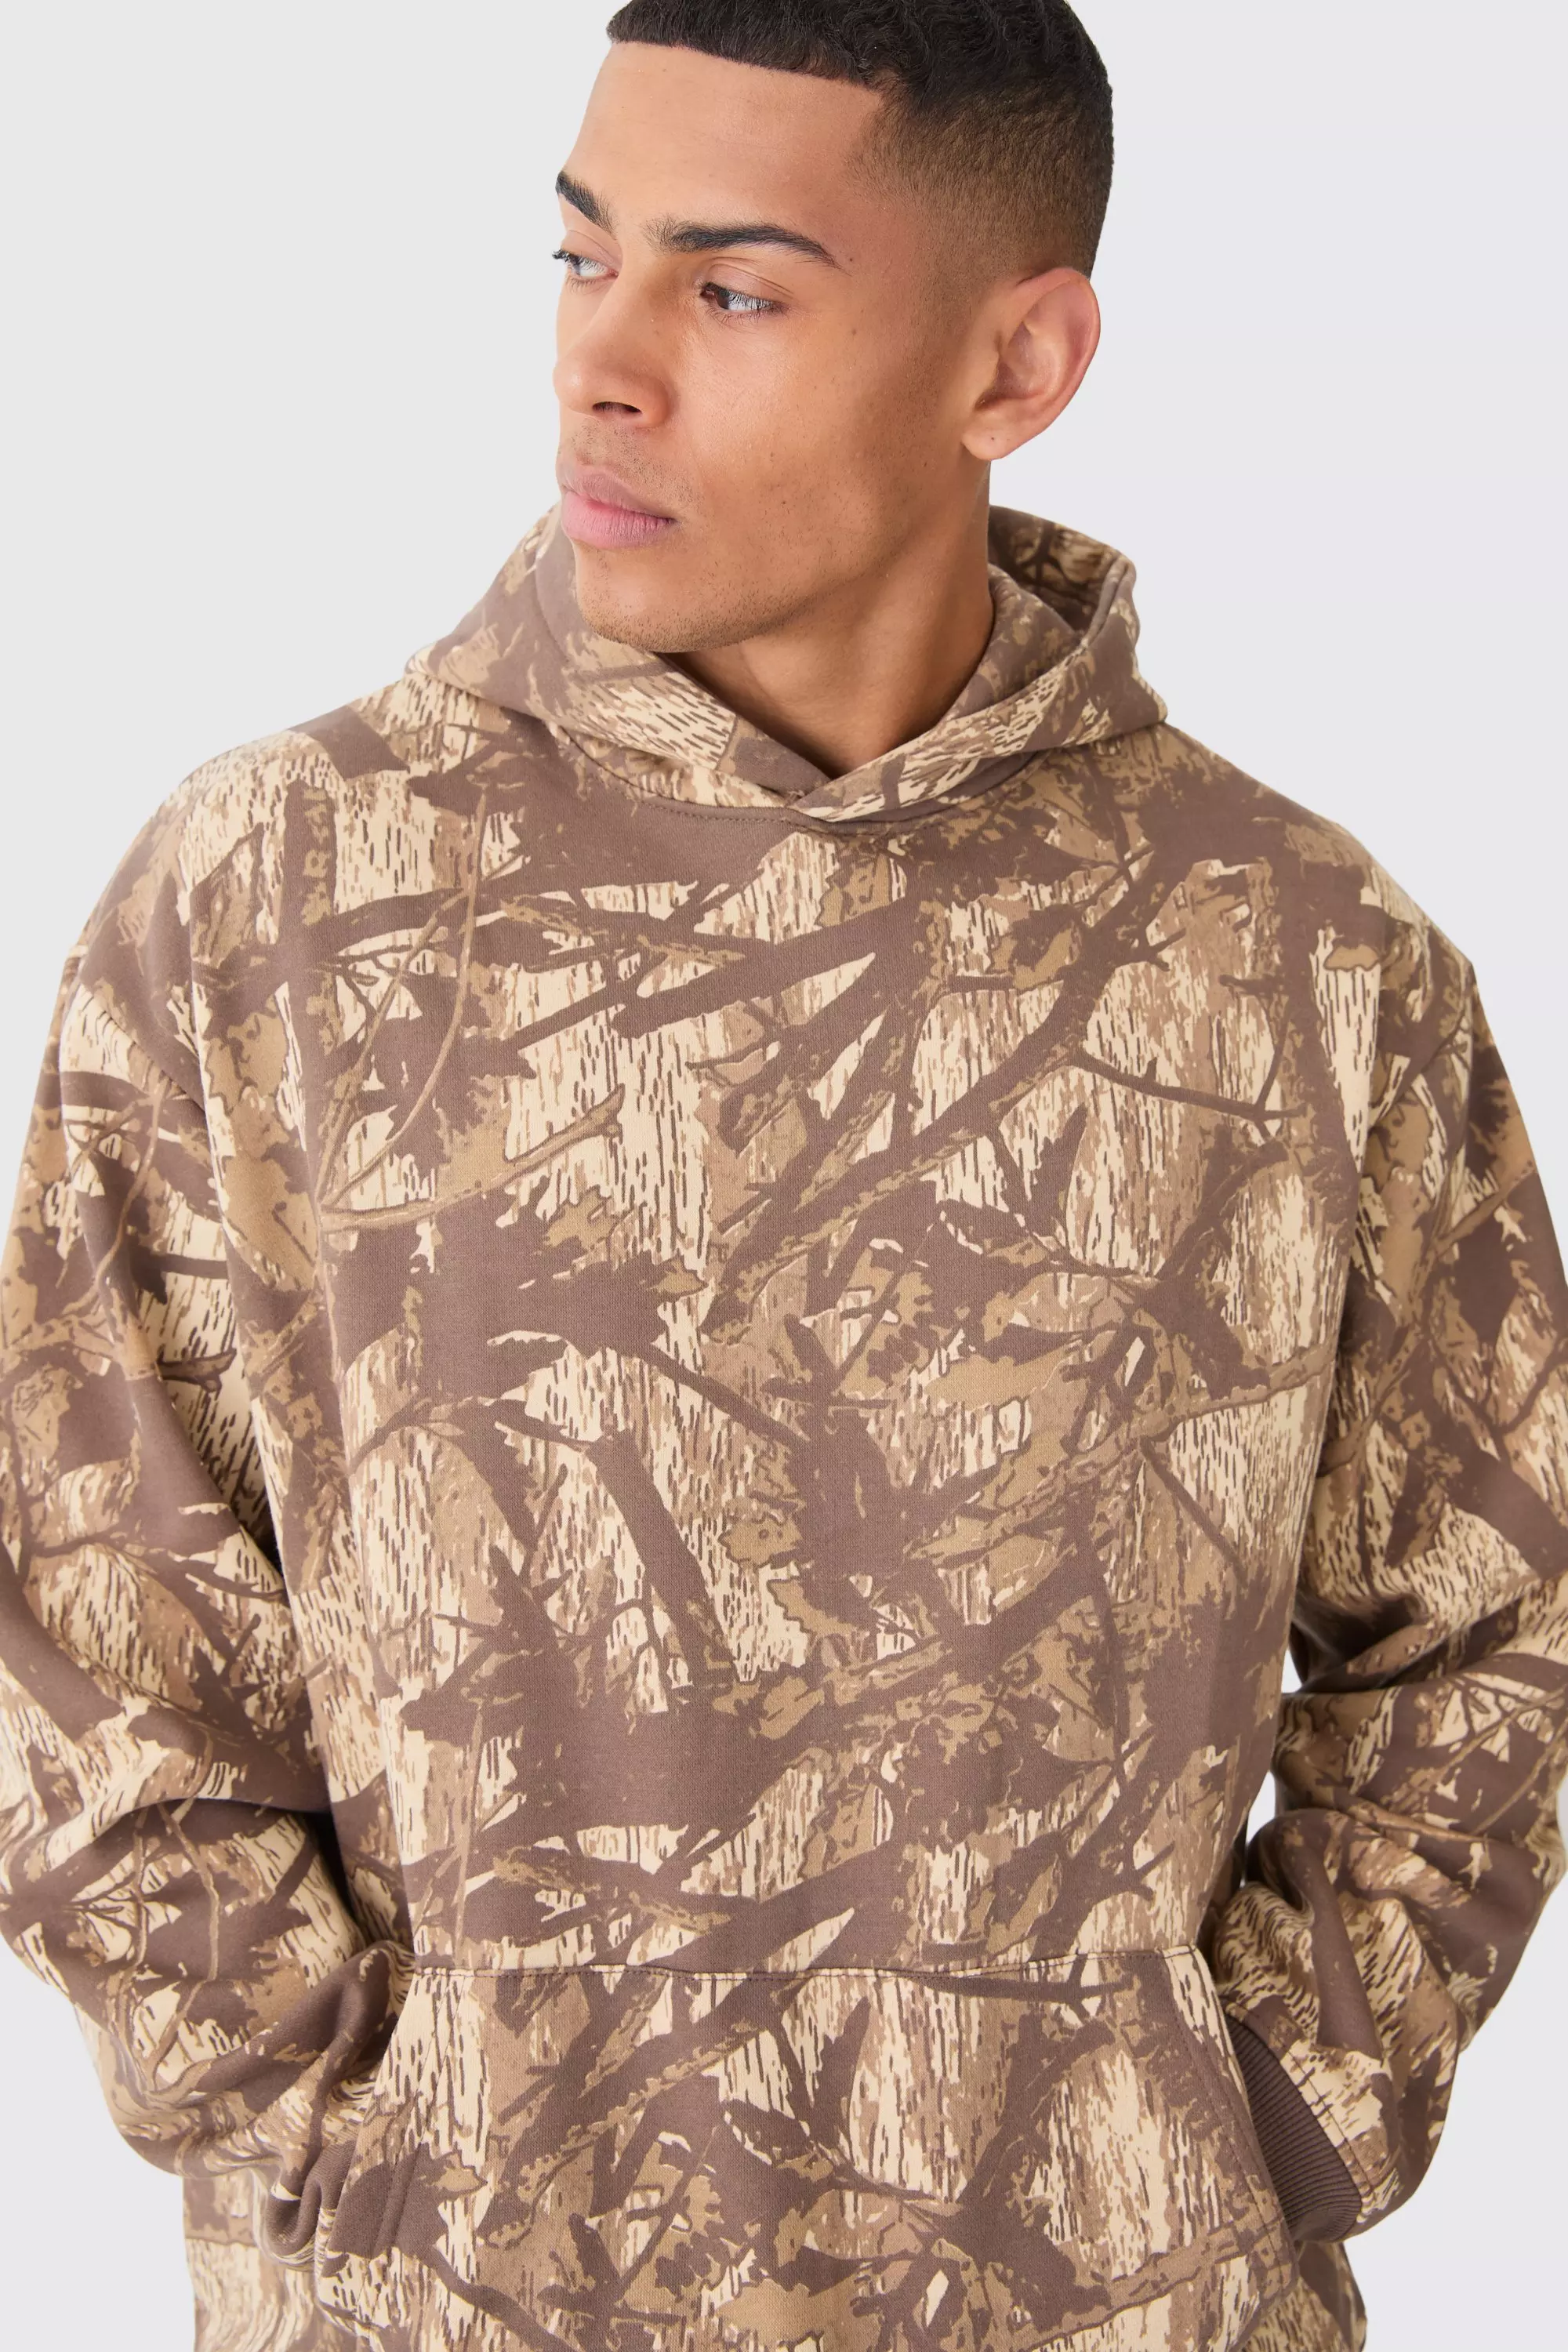 boohooMAN Oversized Forest Camo Hoodie - Gray - Size XL